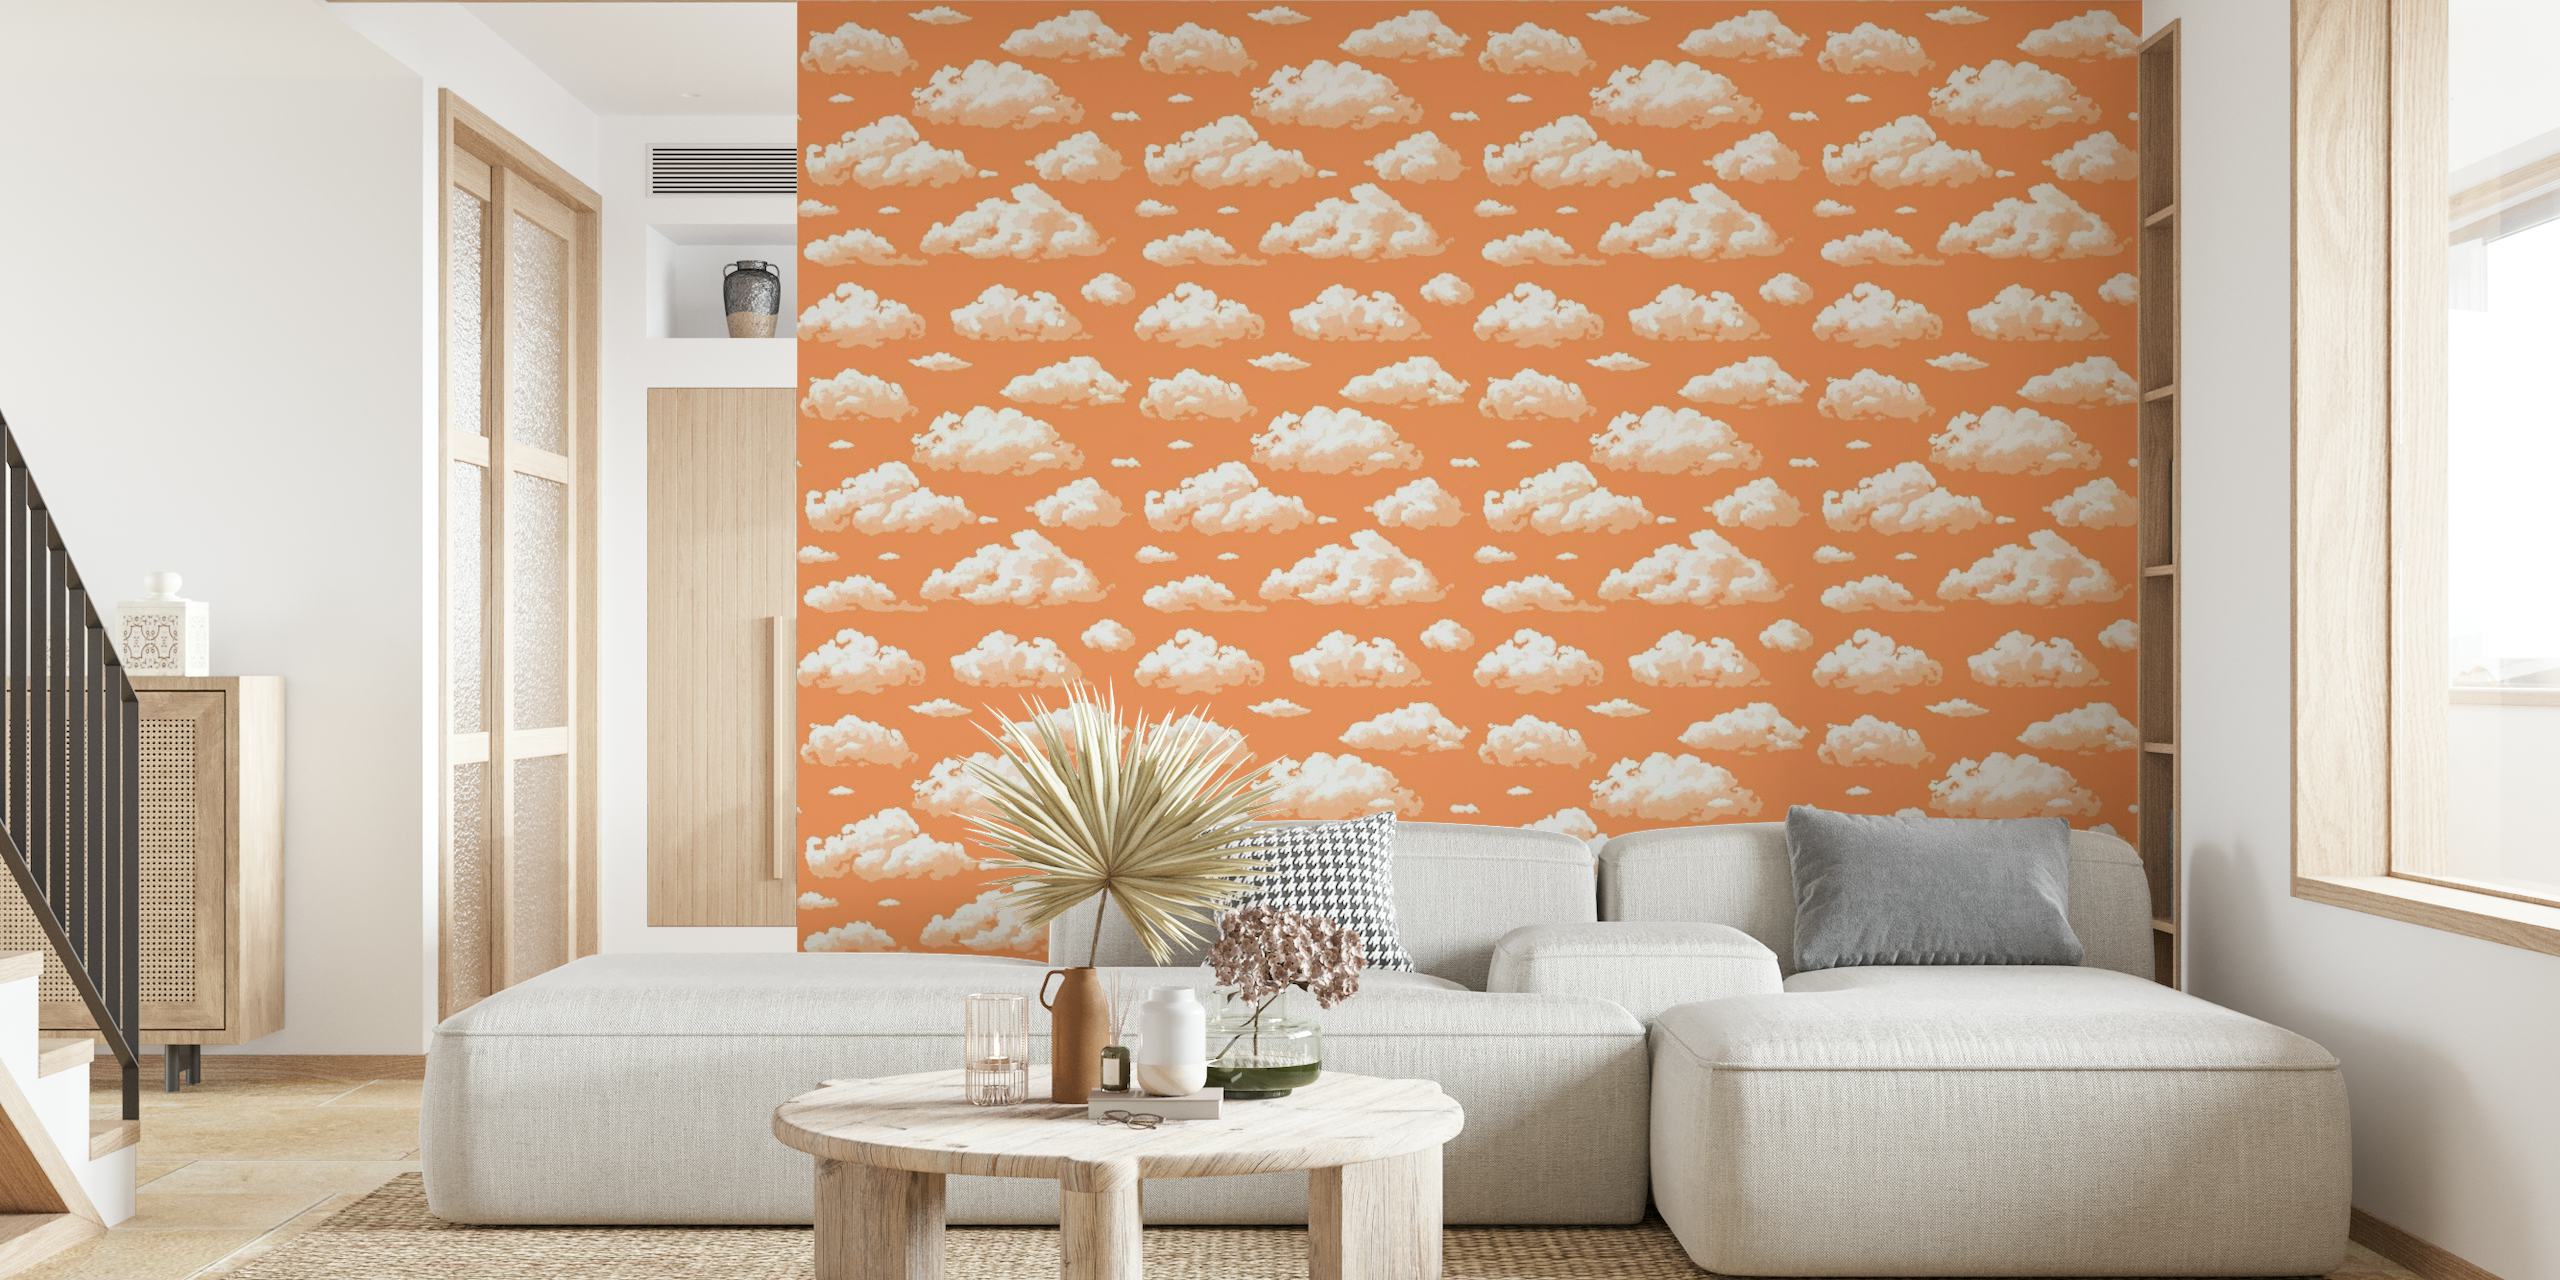 Repeated fluffy white clouds on a warm peach background wall mural